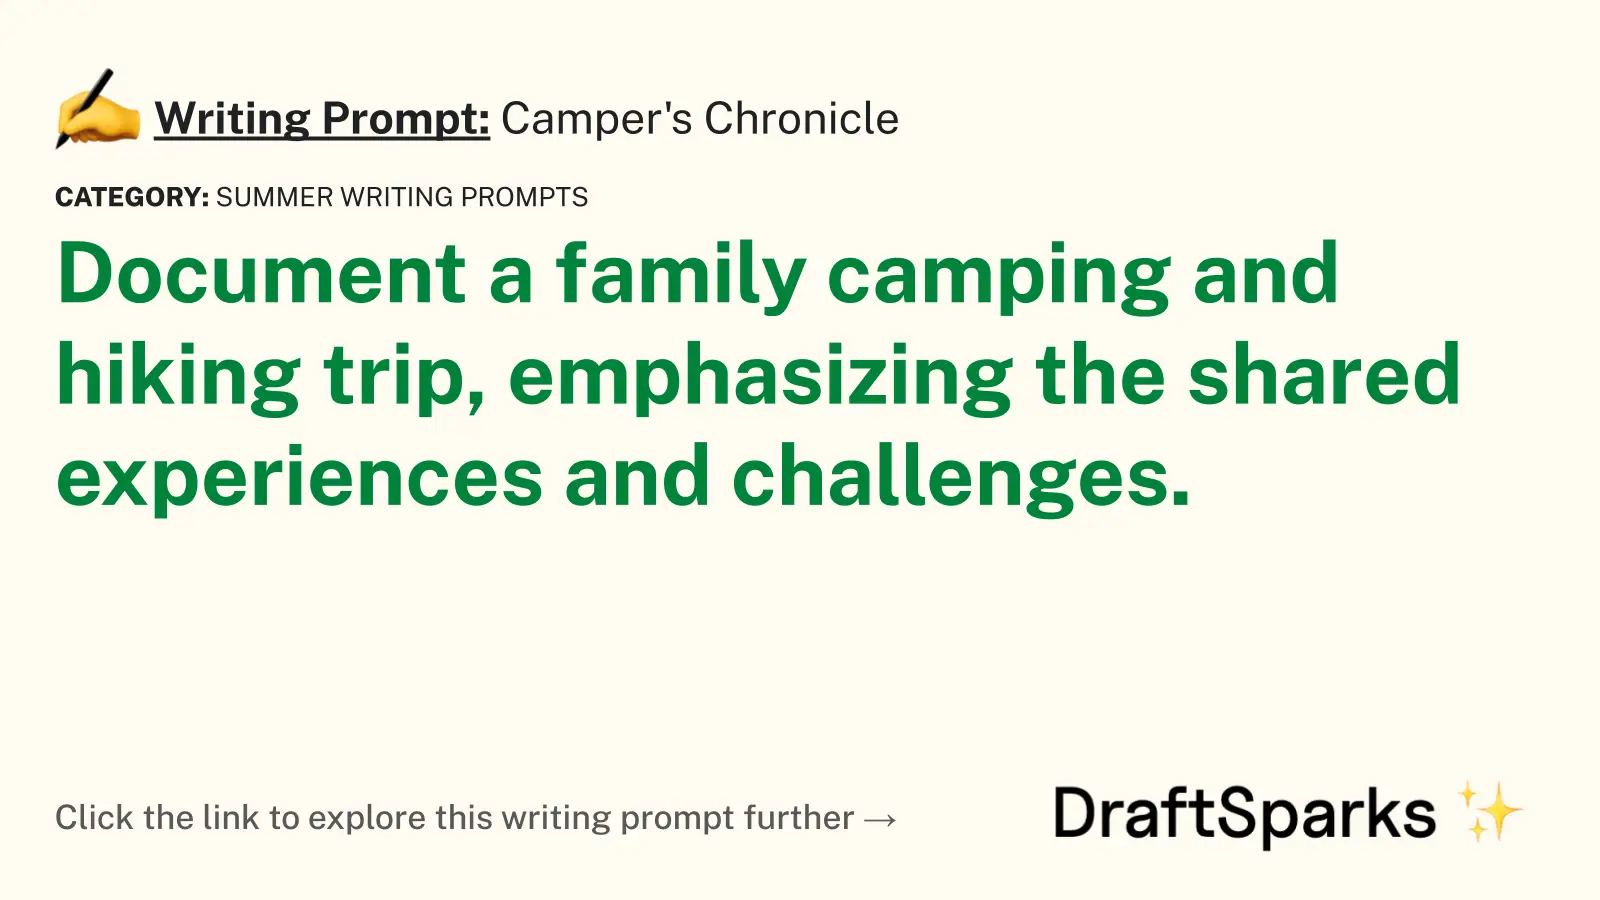 Camper’s Chronicle